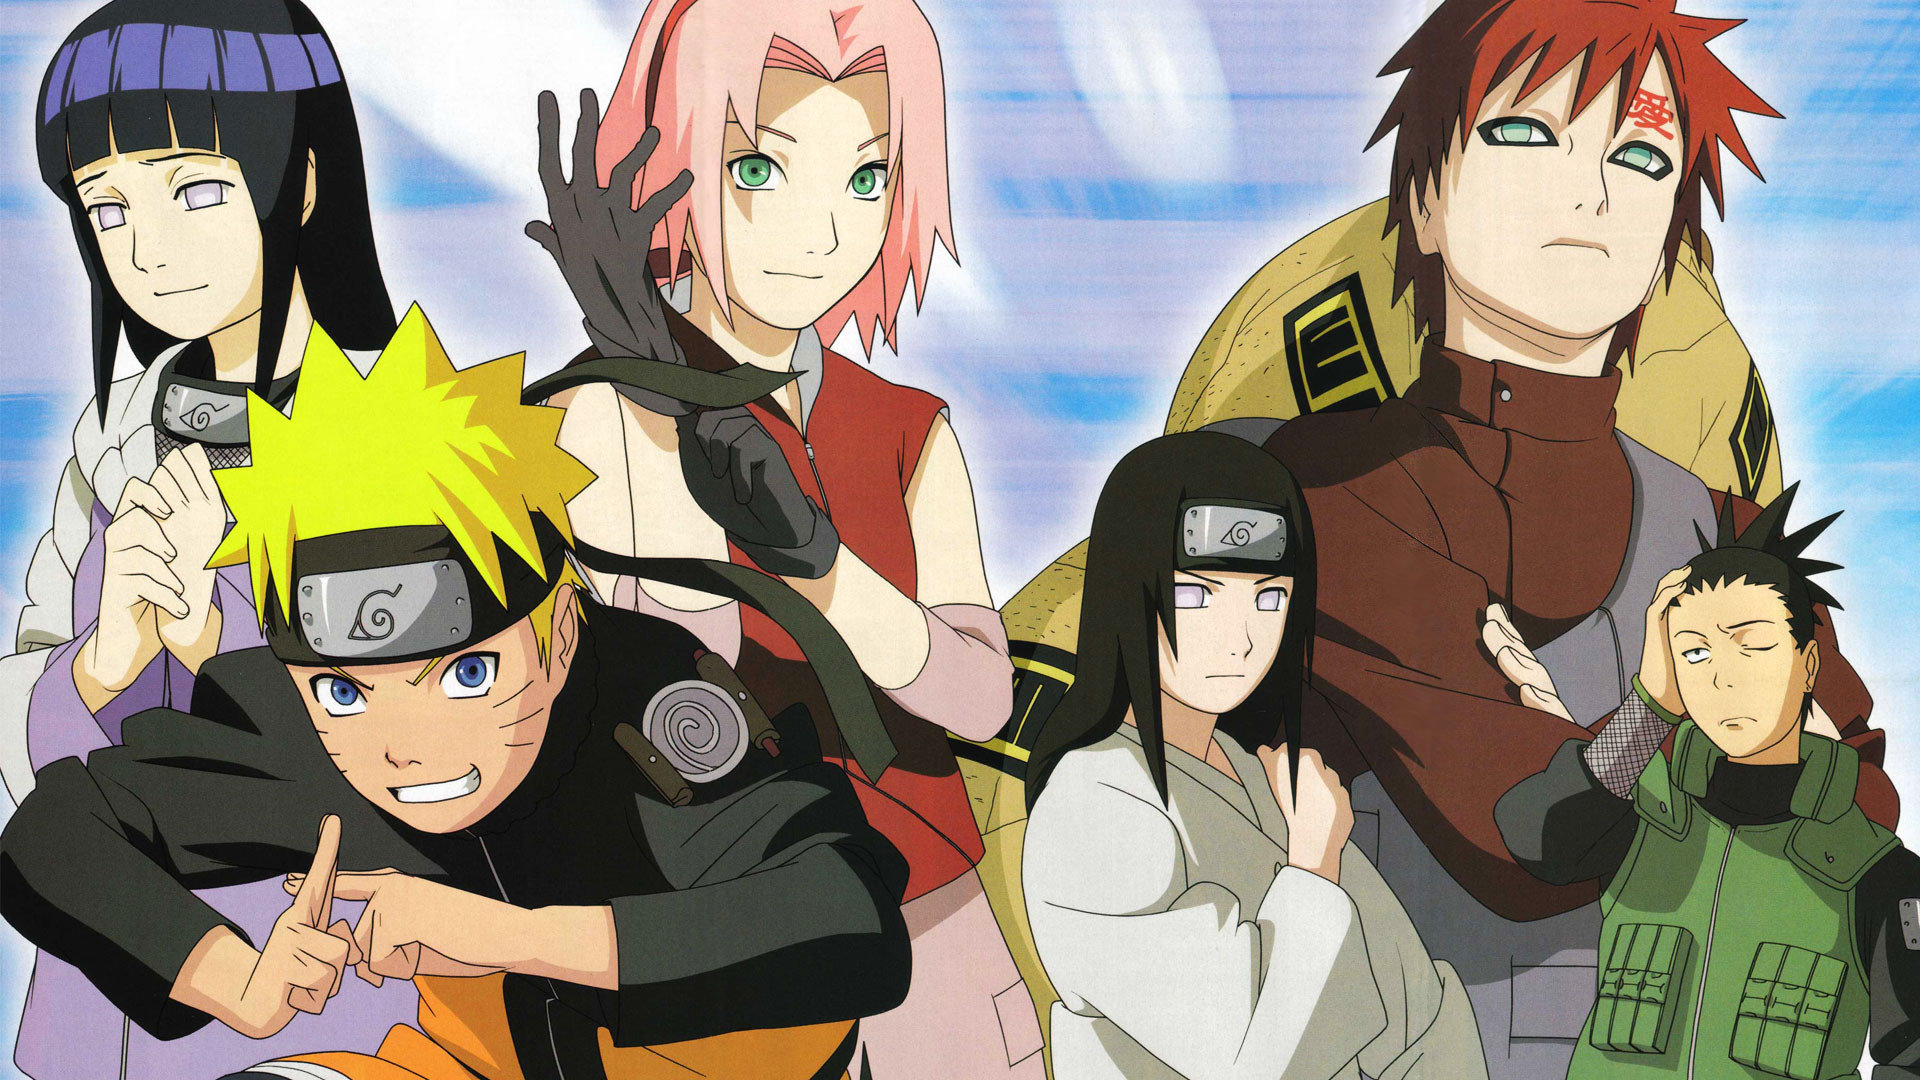 Download 1080p Naruto PC background ID:395272 for free